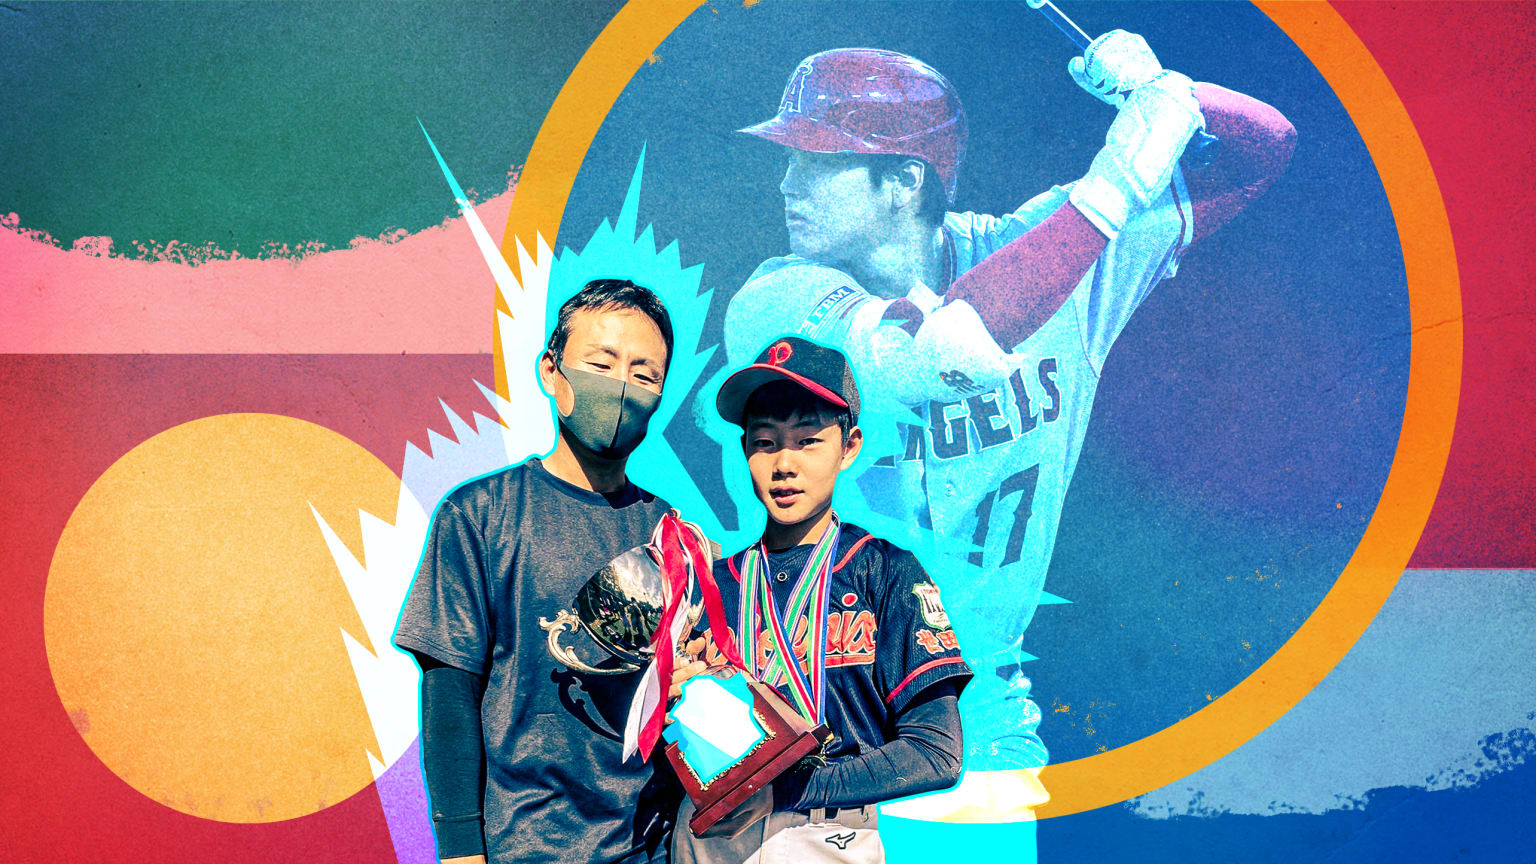 A photo illustration of a young Japanese player holding a trophy next to a coach in a mask with a larger image of Shohei Ohtani behind them